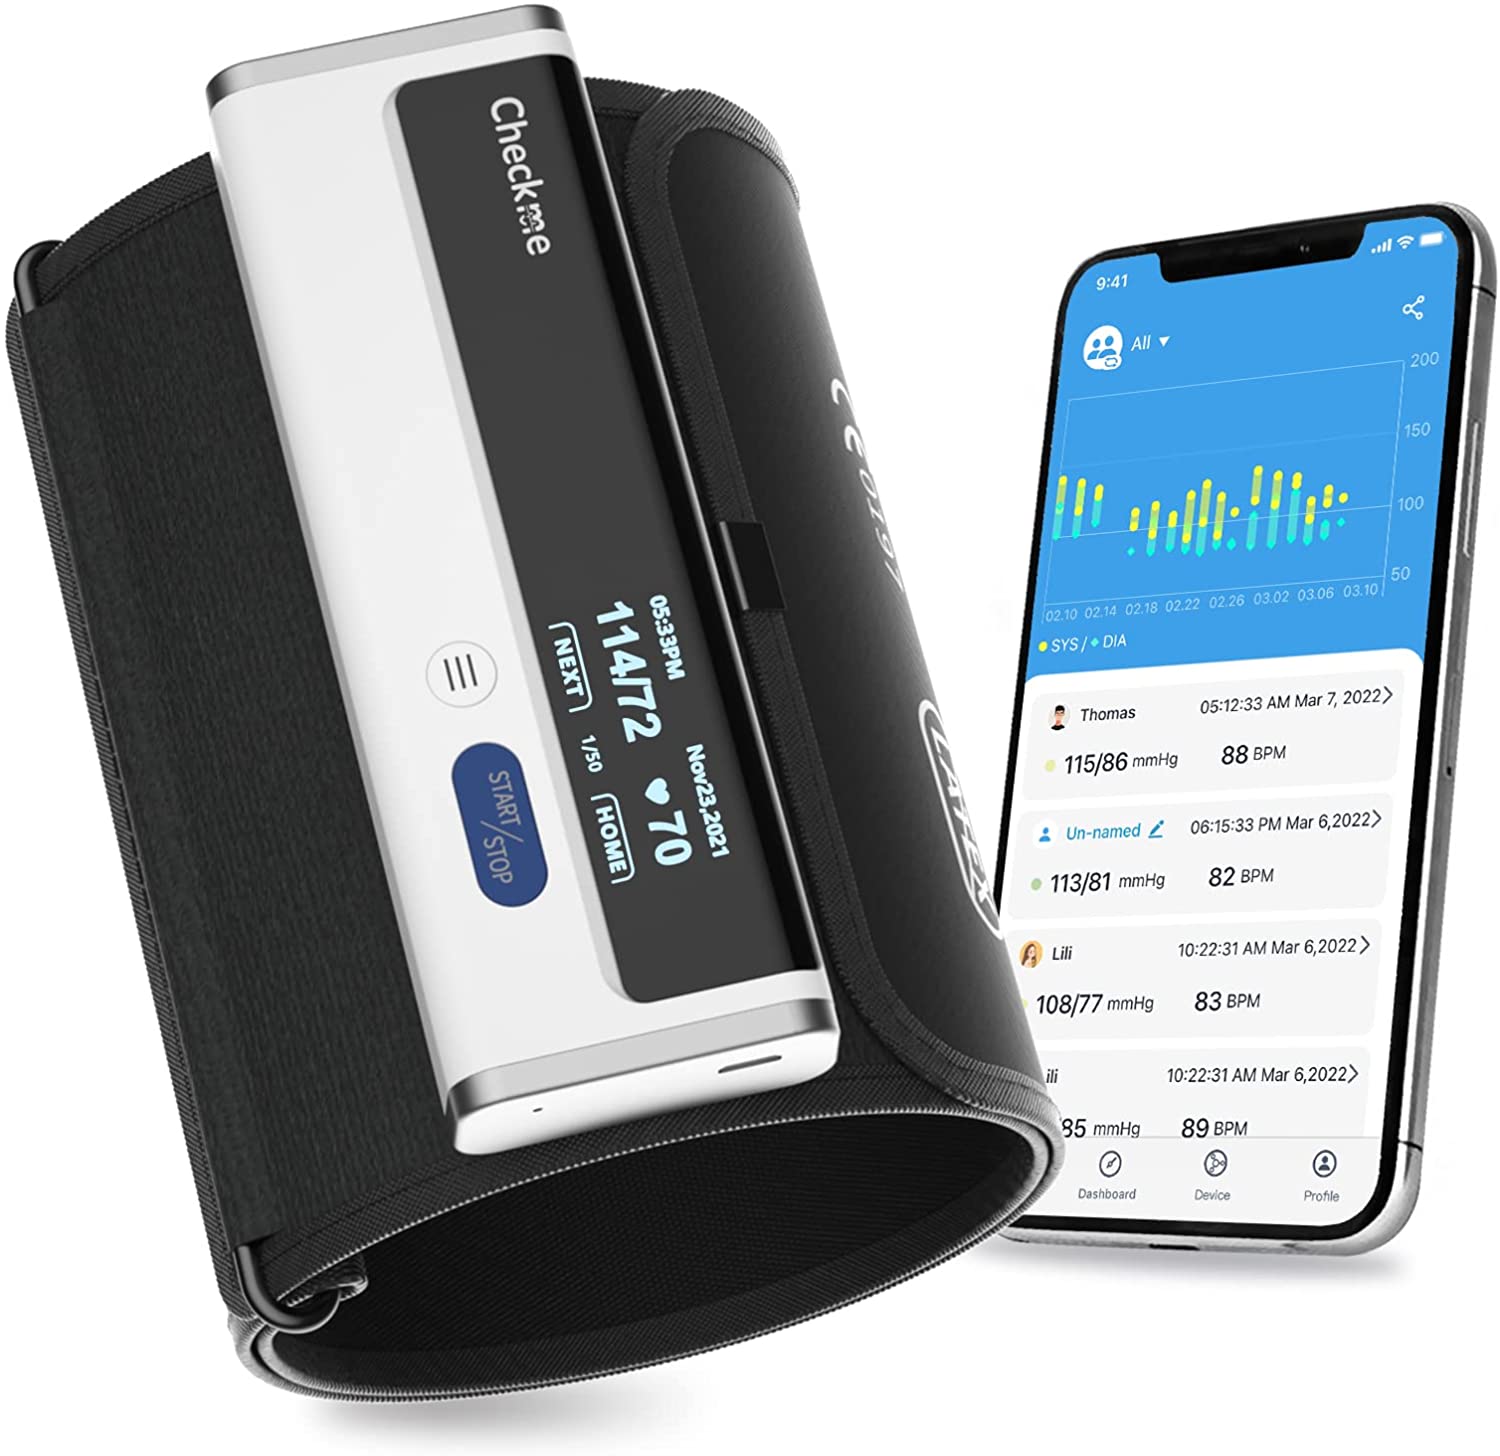 Best Smart Blood Pressure Monitors For iPhone Users - iOS Hacker